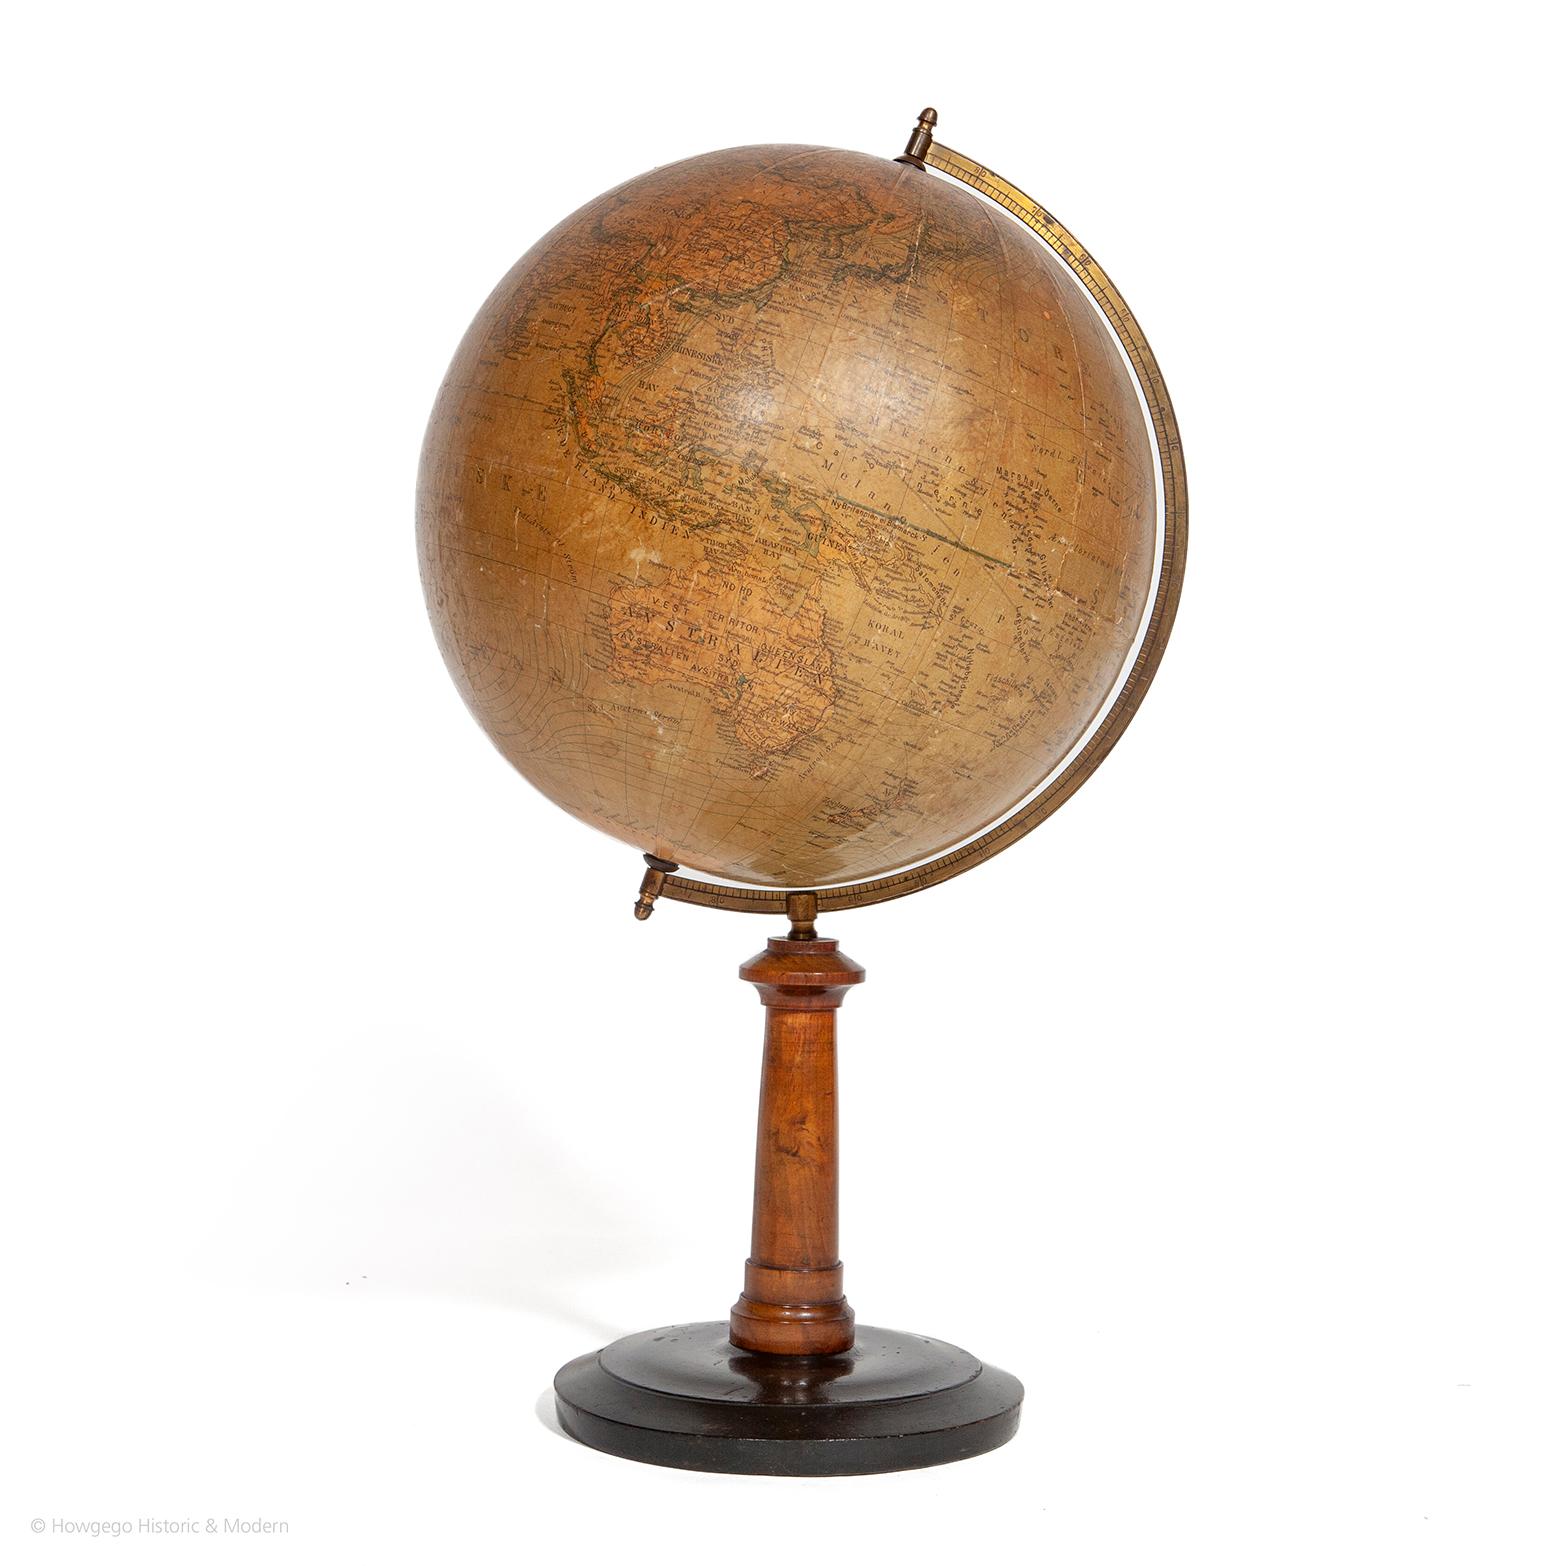 A Swedish 12 inch terrestrial globe, circa 1900. Measure: height 59cm

Just purchased more information to follow.